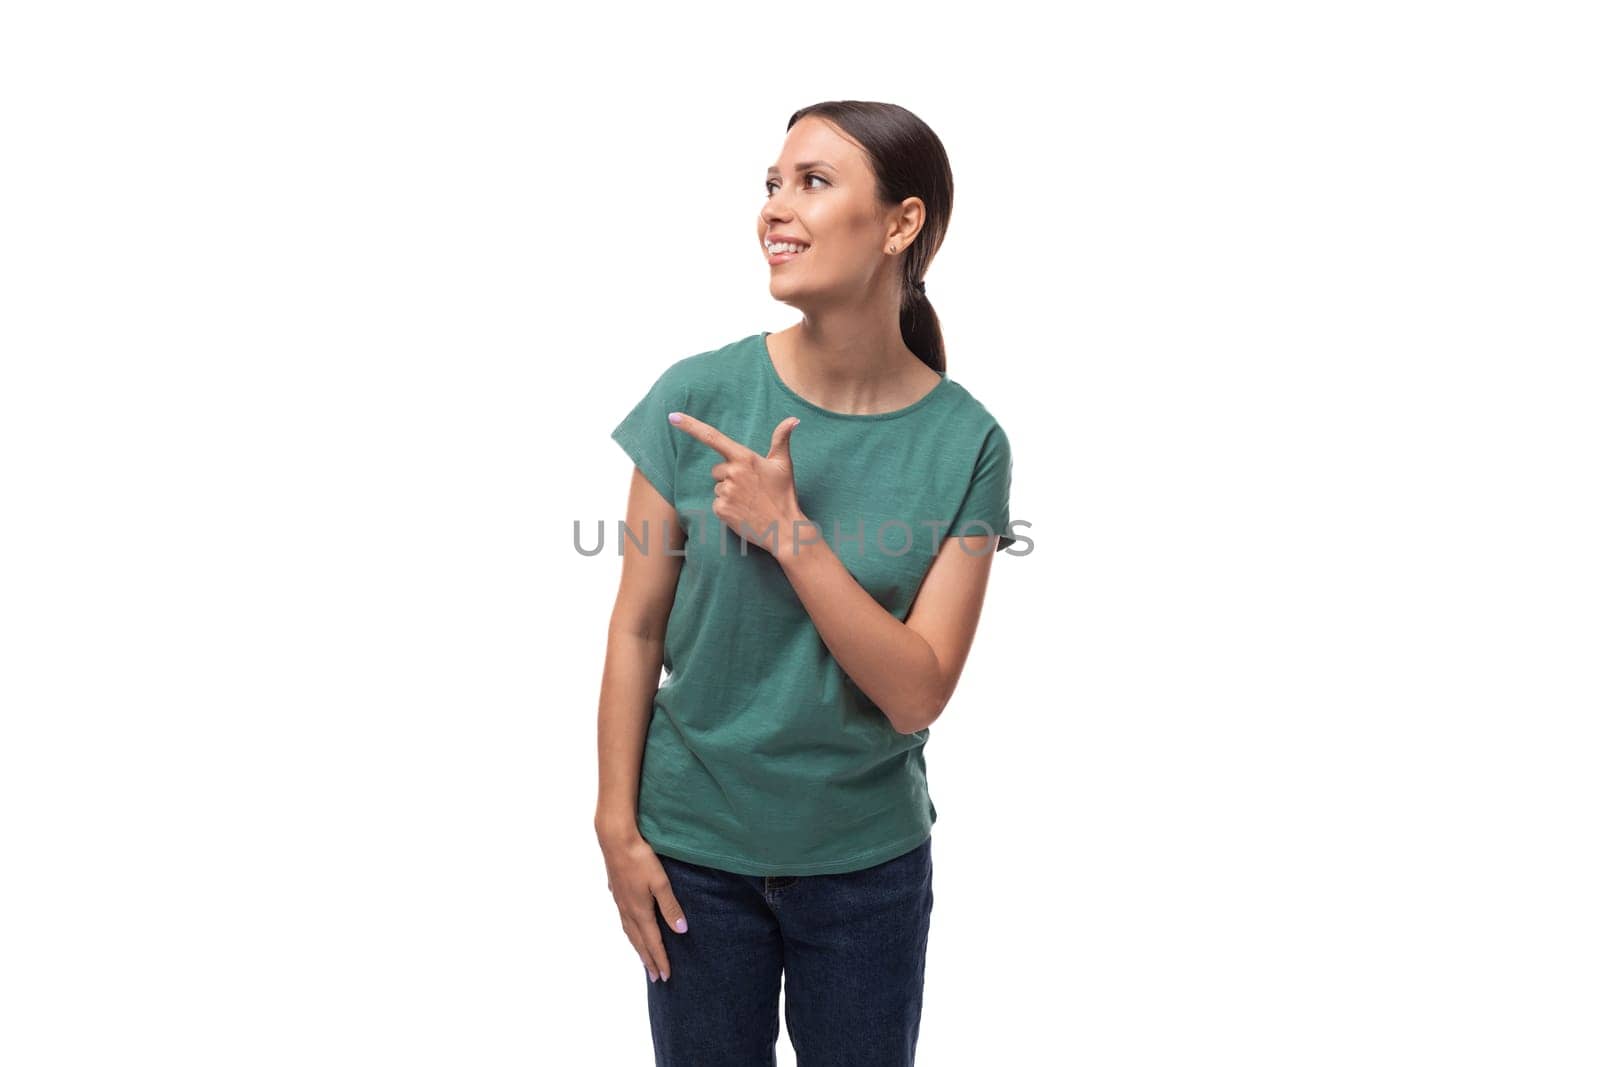 a young smiling woman with black hair and a slim figure dressed in a green T-shirt points with her hand and an empty white space for advertising.